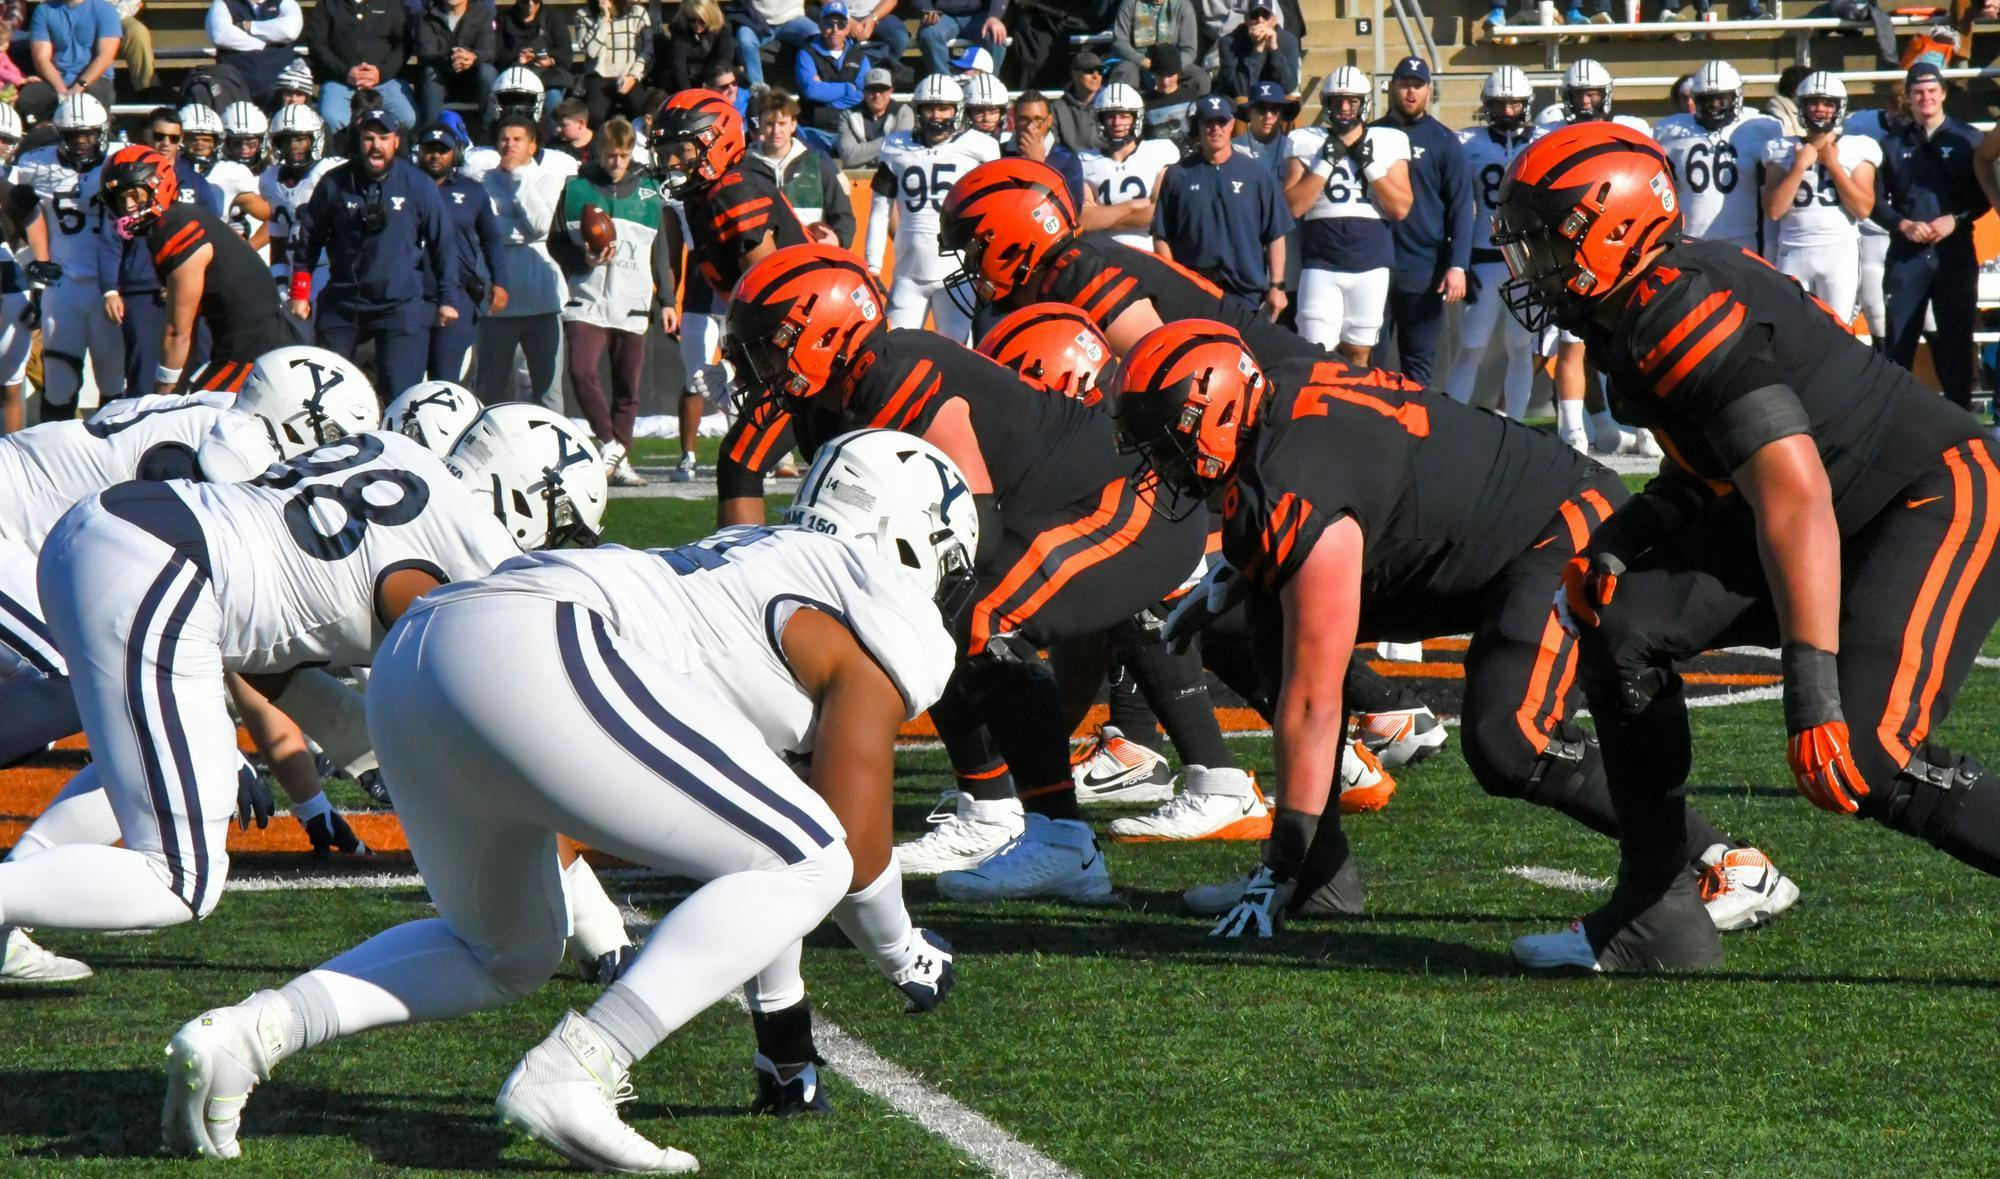 Yale football players on the left and Princeton football players on the right get in position to start the next play.